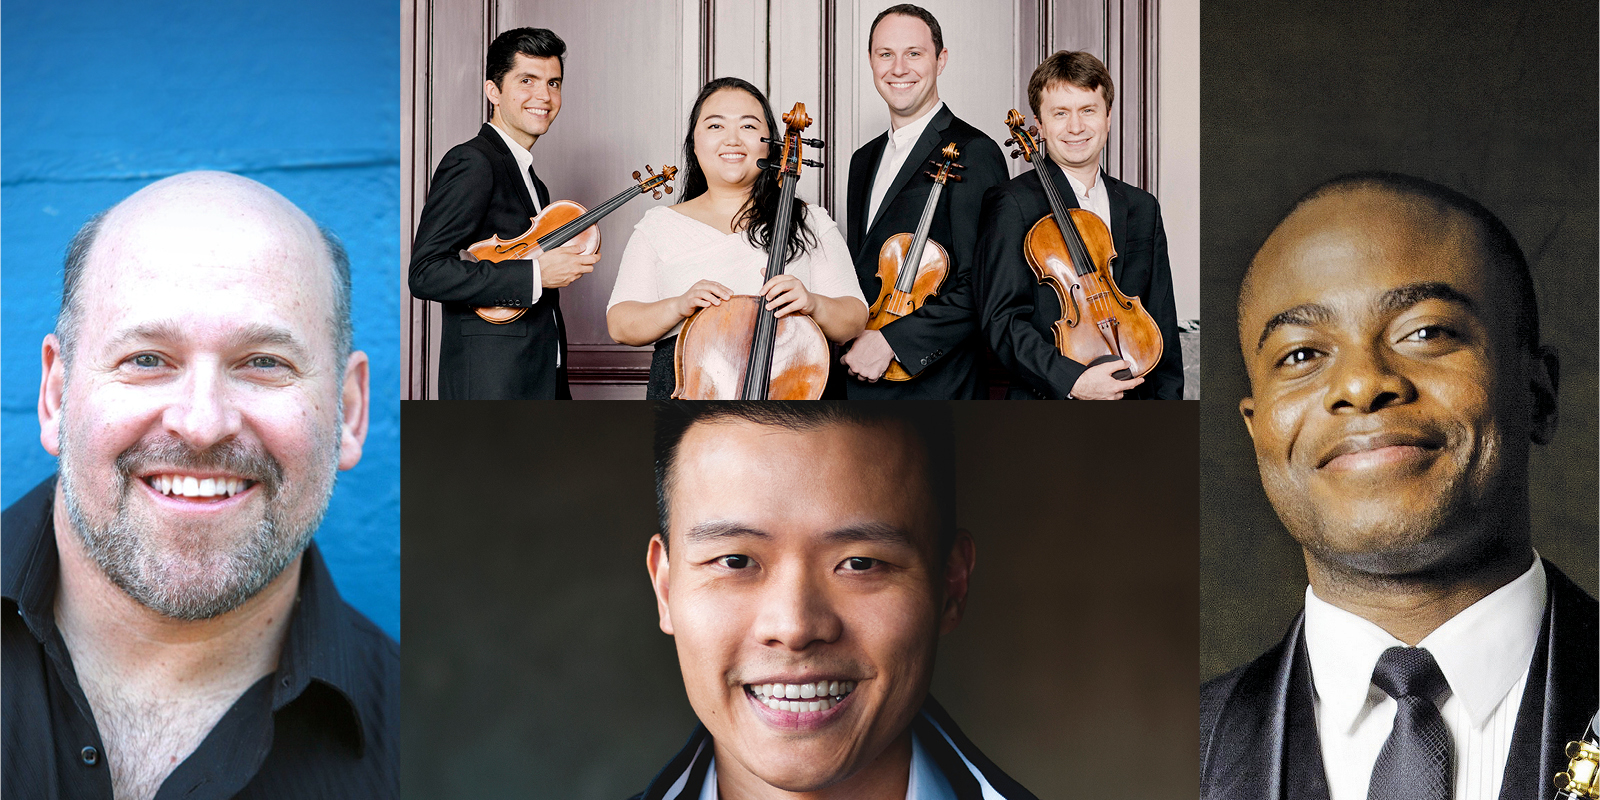 Pianist David Fung, Broadway Composer Frank Wildhorn, Clarinetist Anthony McGill Featured in UGA Presents February Schedule